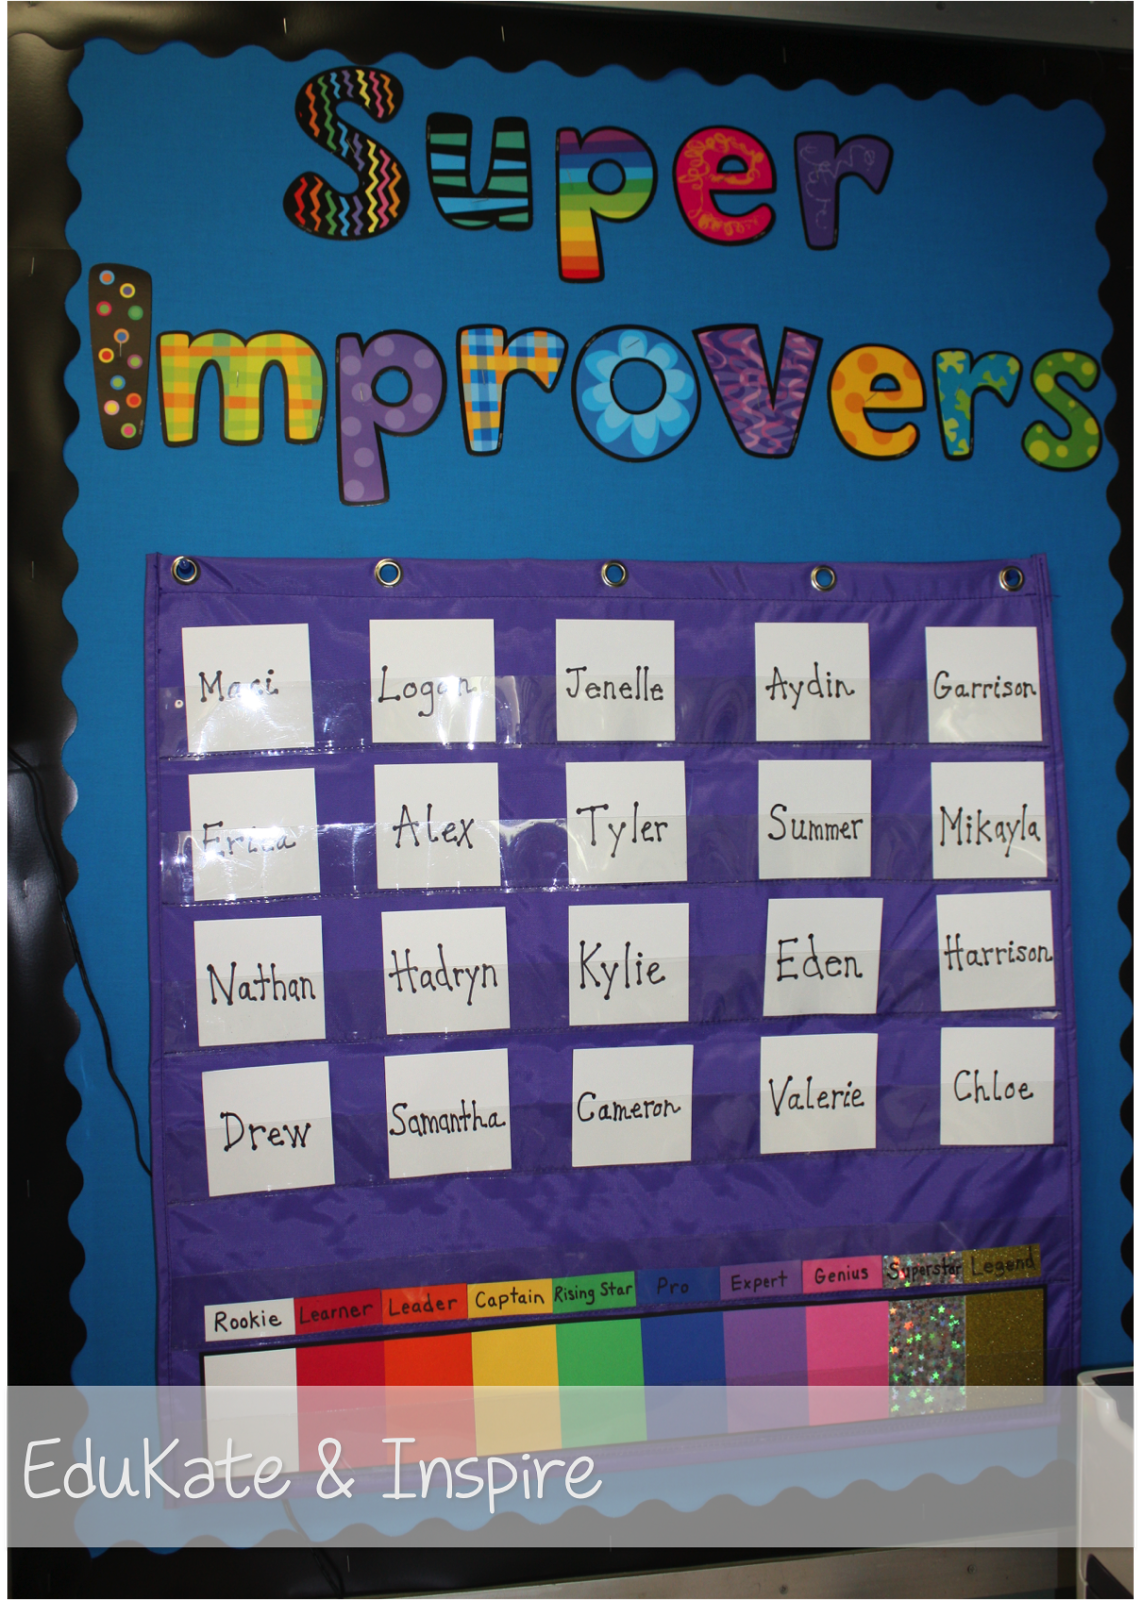 whole-brain-teaching-using-a-super-improver-wall-to-motivate-students